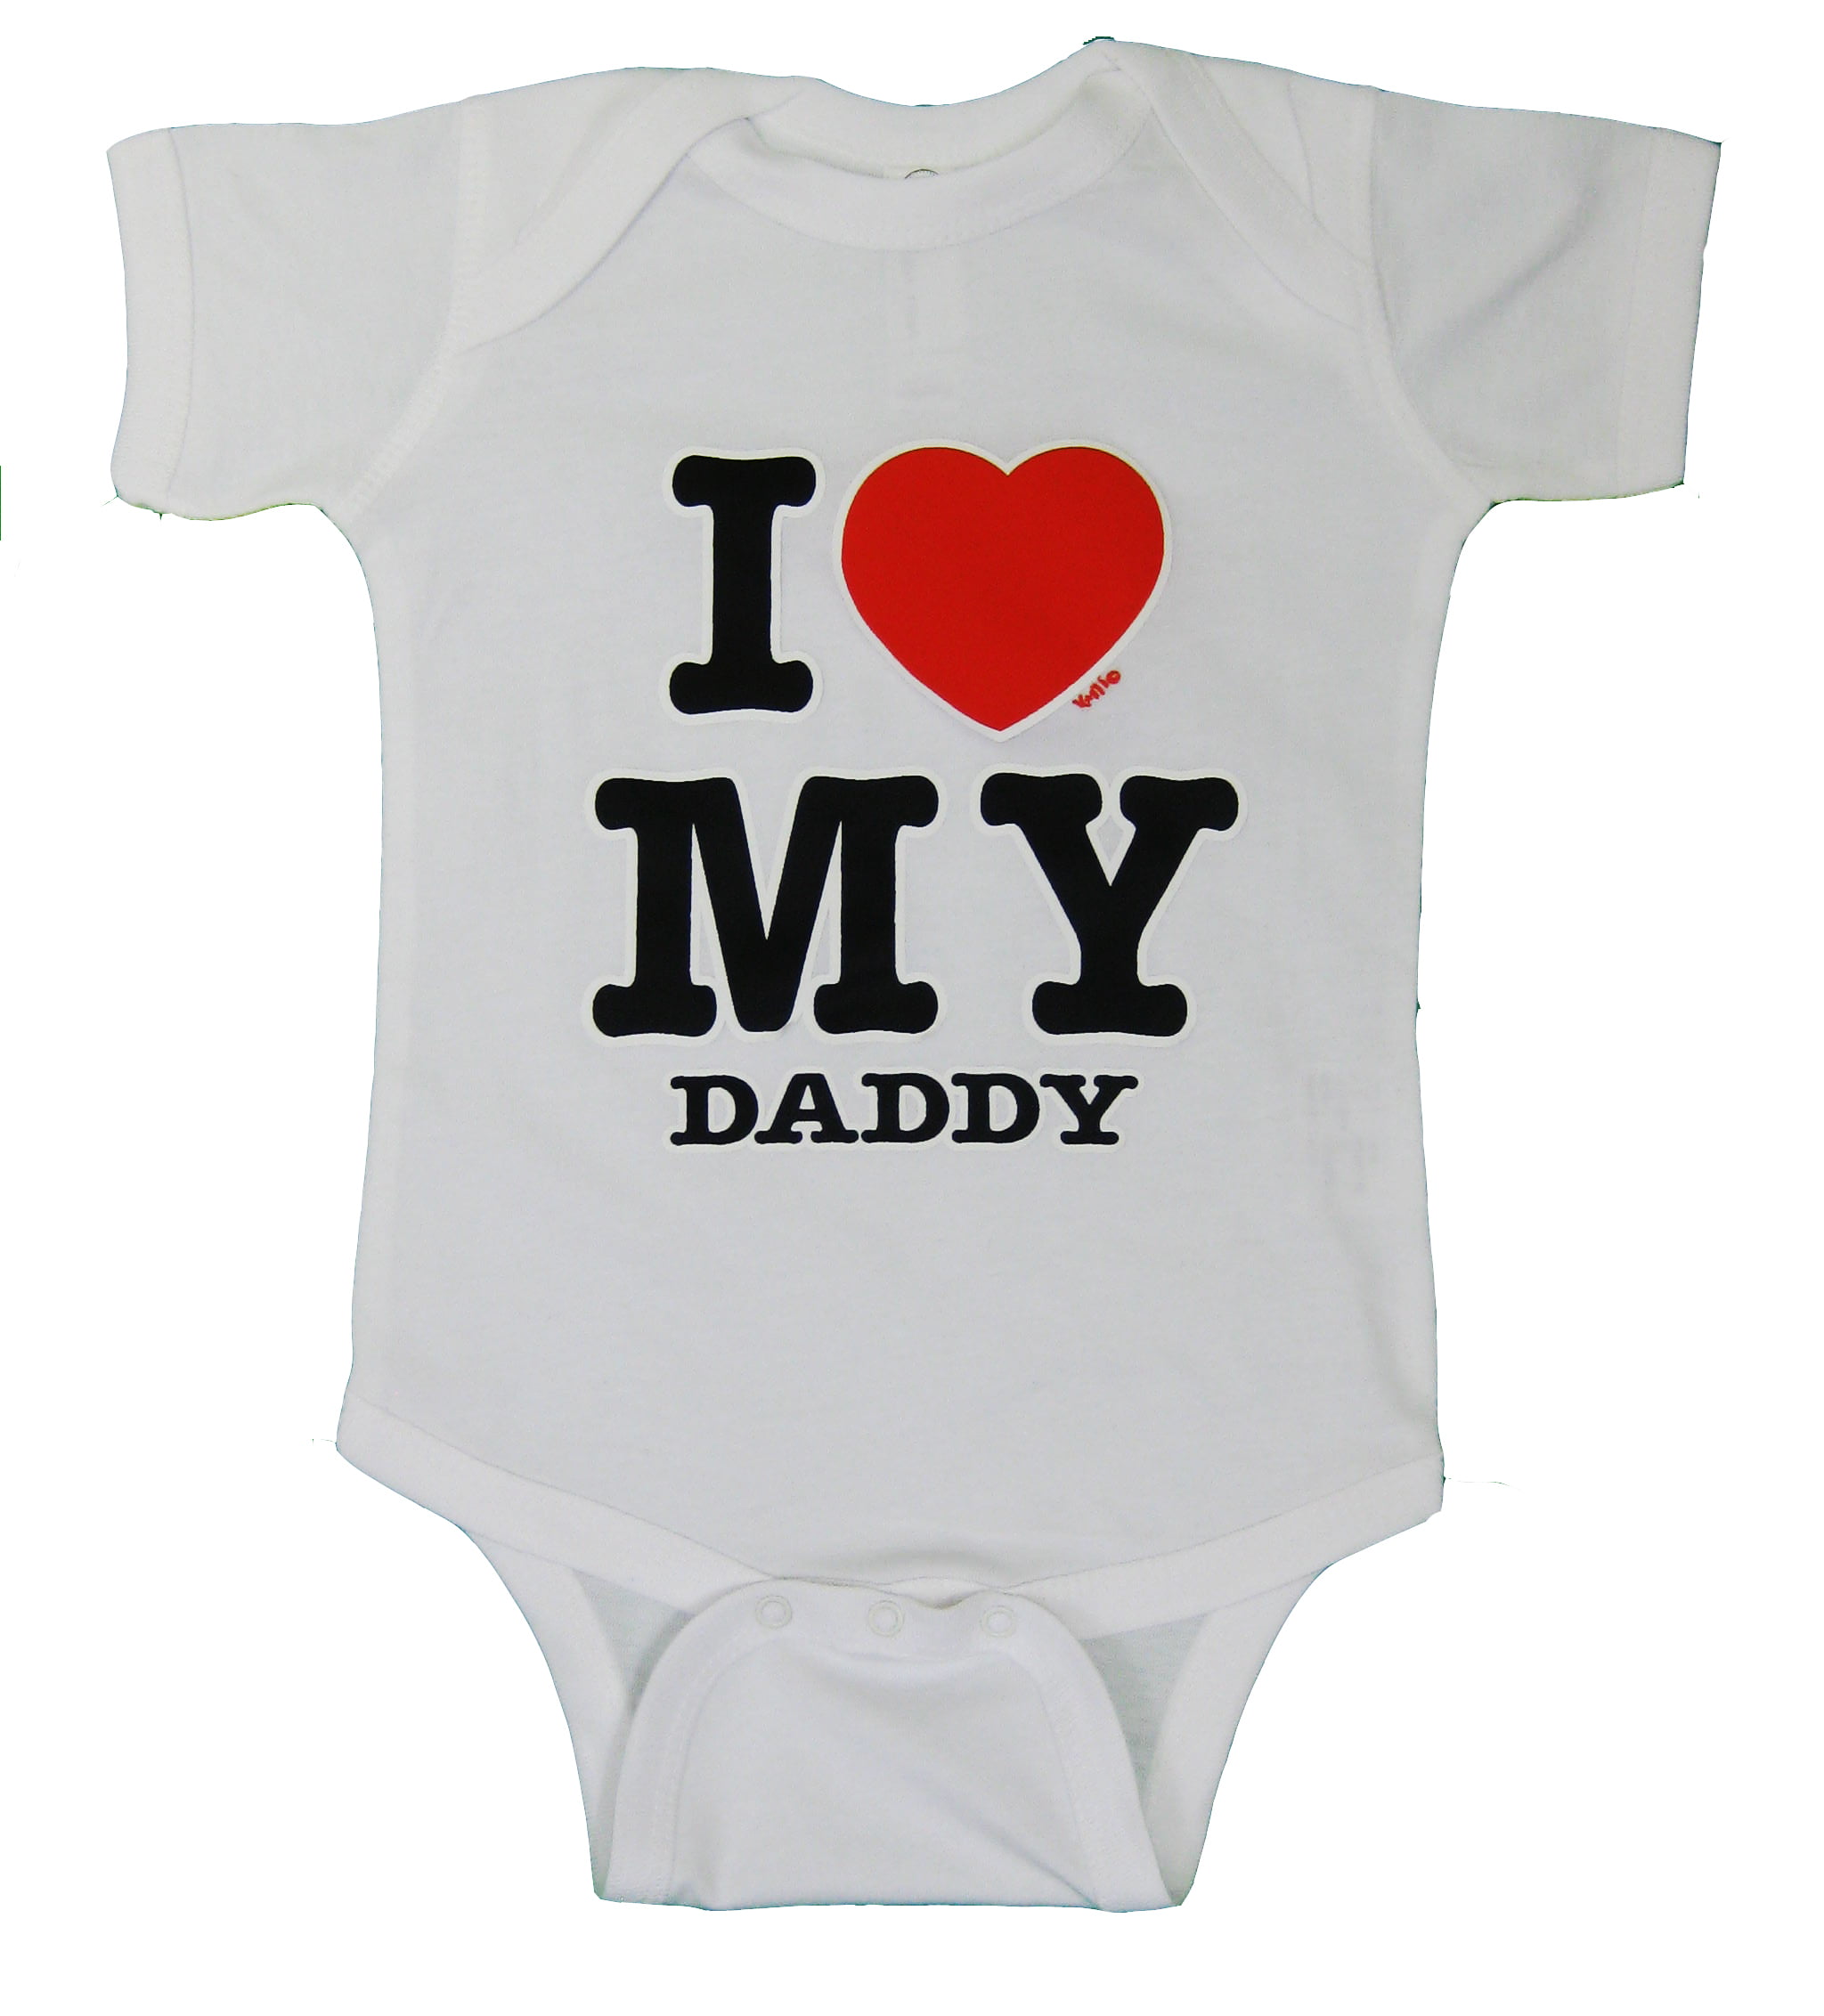 I LOVE MY AUNTIE CUTE BABY BODY GROW SUIT VEST GIRL BOY CLOTHES GIFT IDEA 